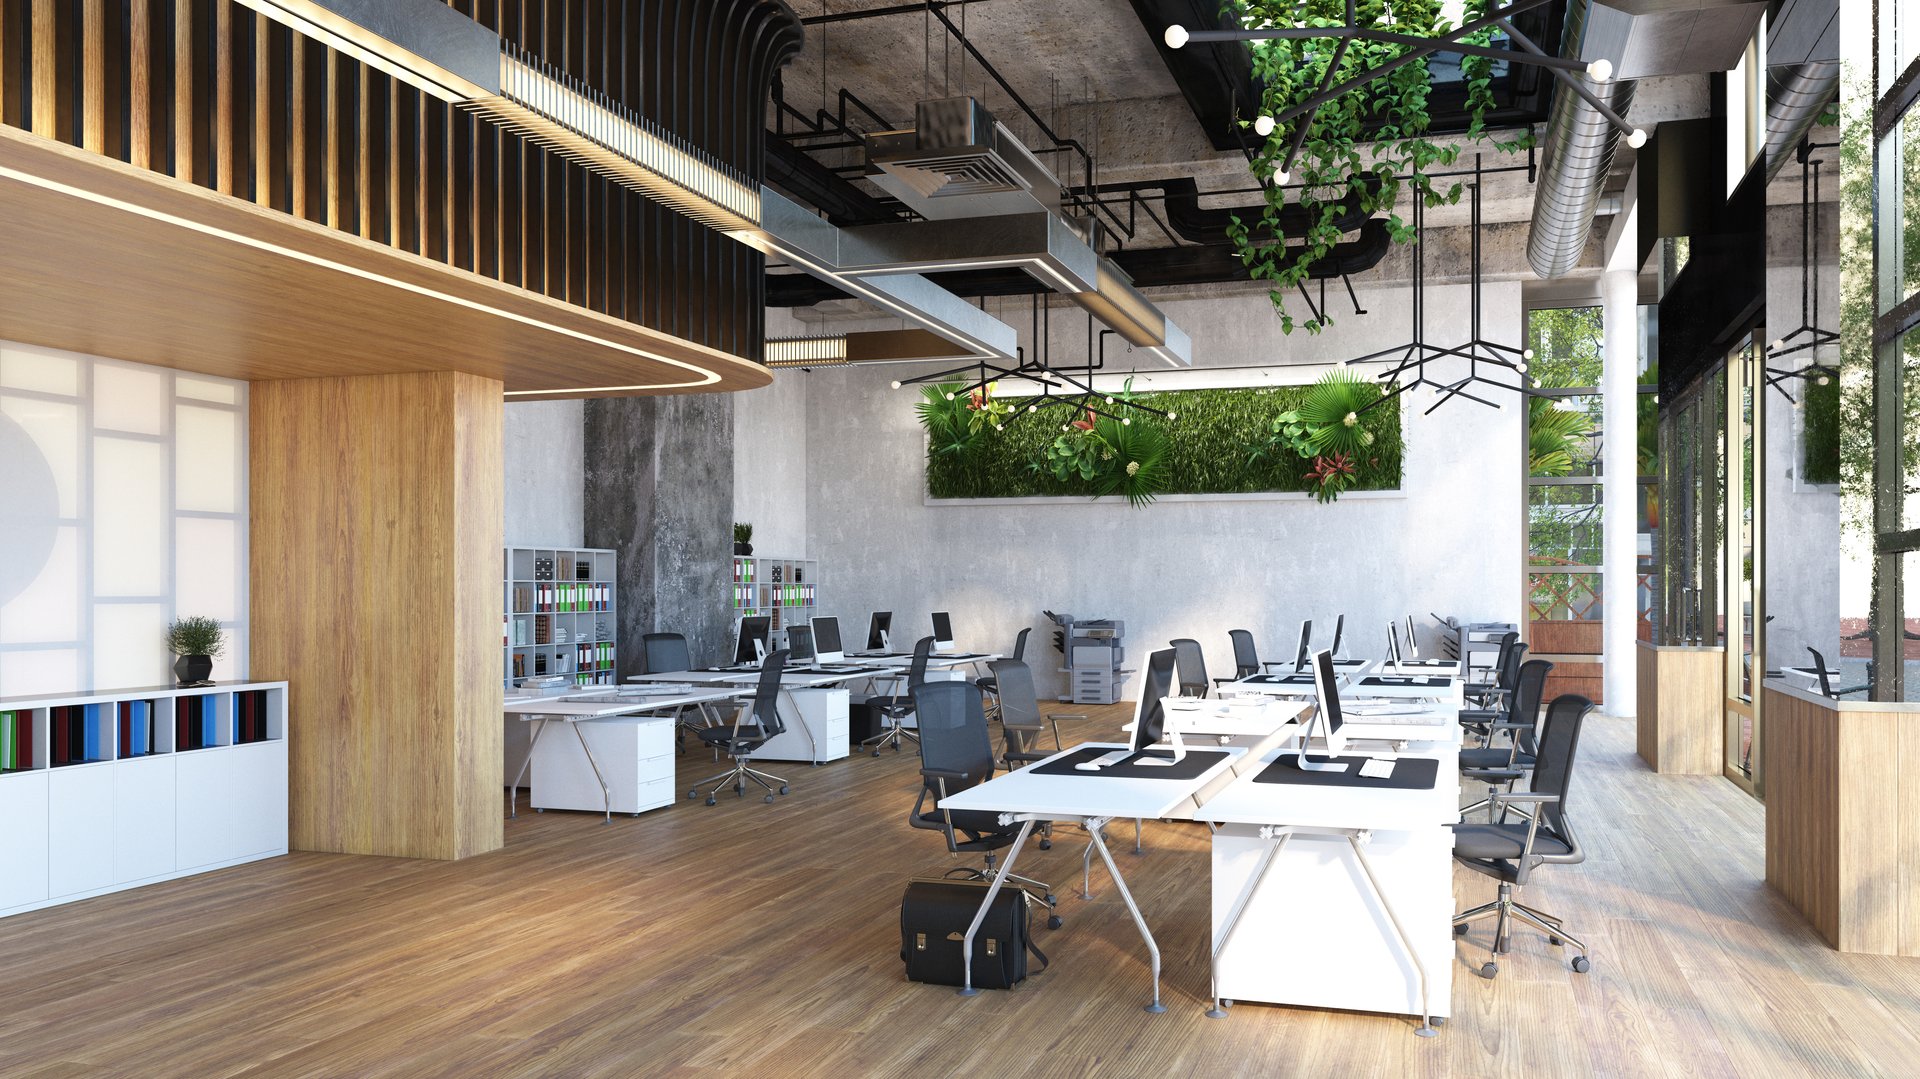 Biophilic Design: How to Incorporate Natural Elements in Modern Offices